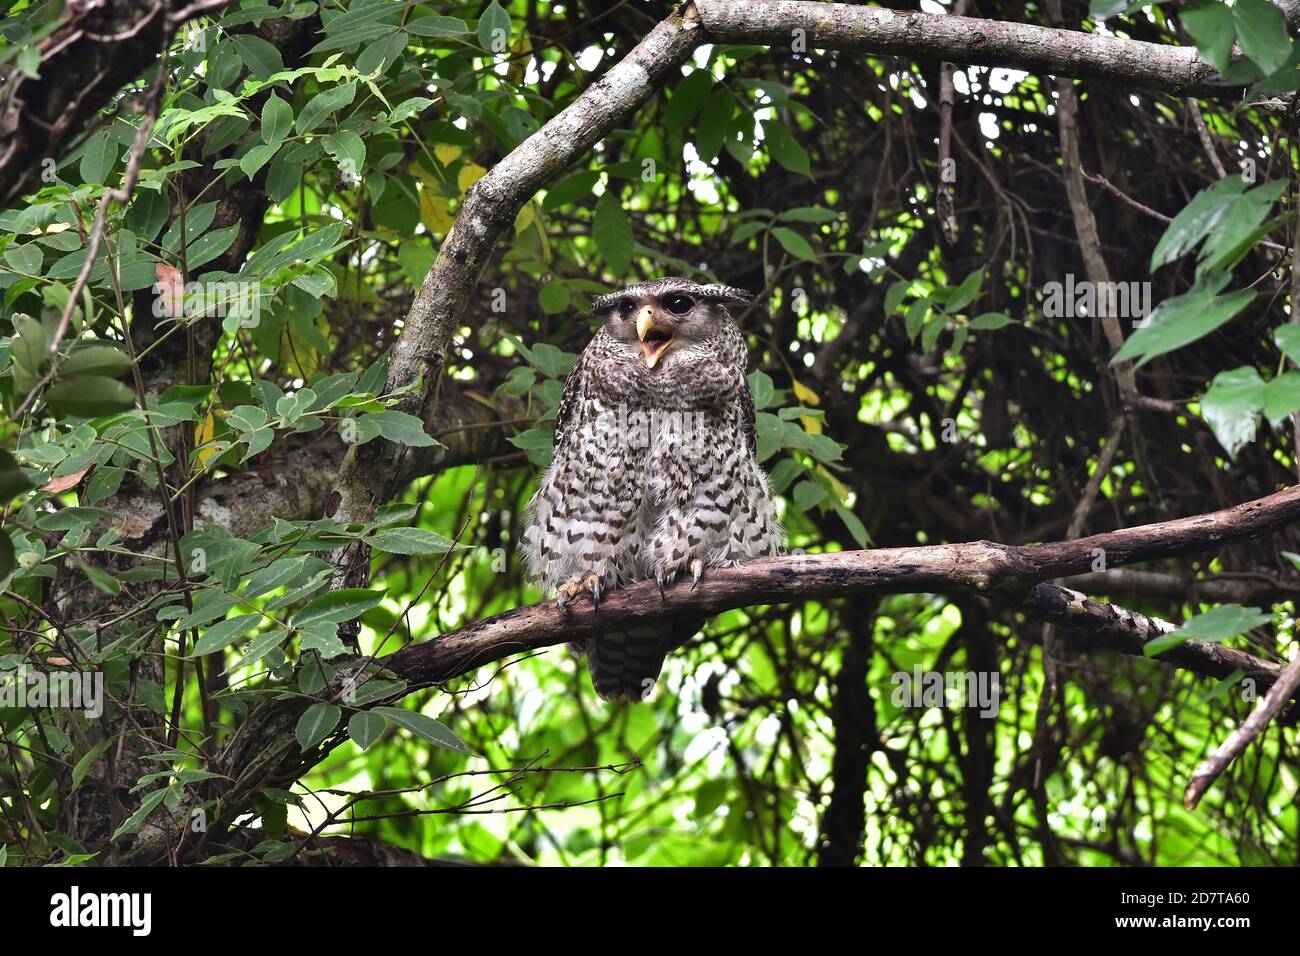 Spot-Bellied Eagle Owl bird sitting on the tree in nature, Thailand Stock Photo